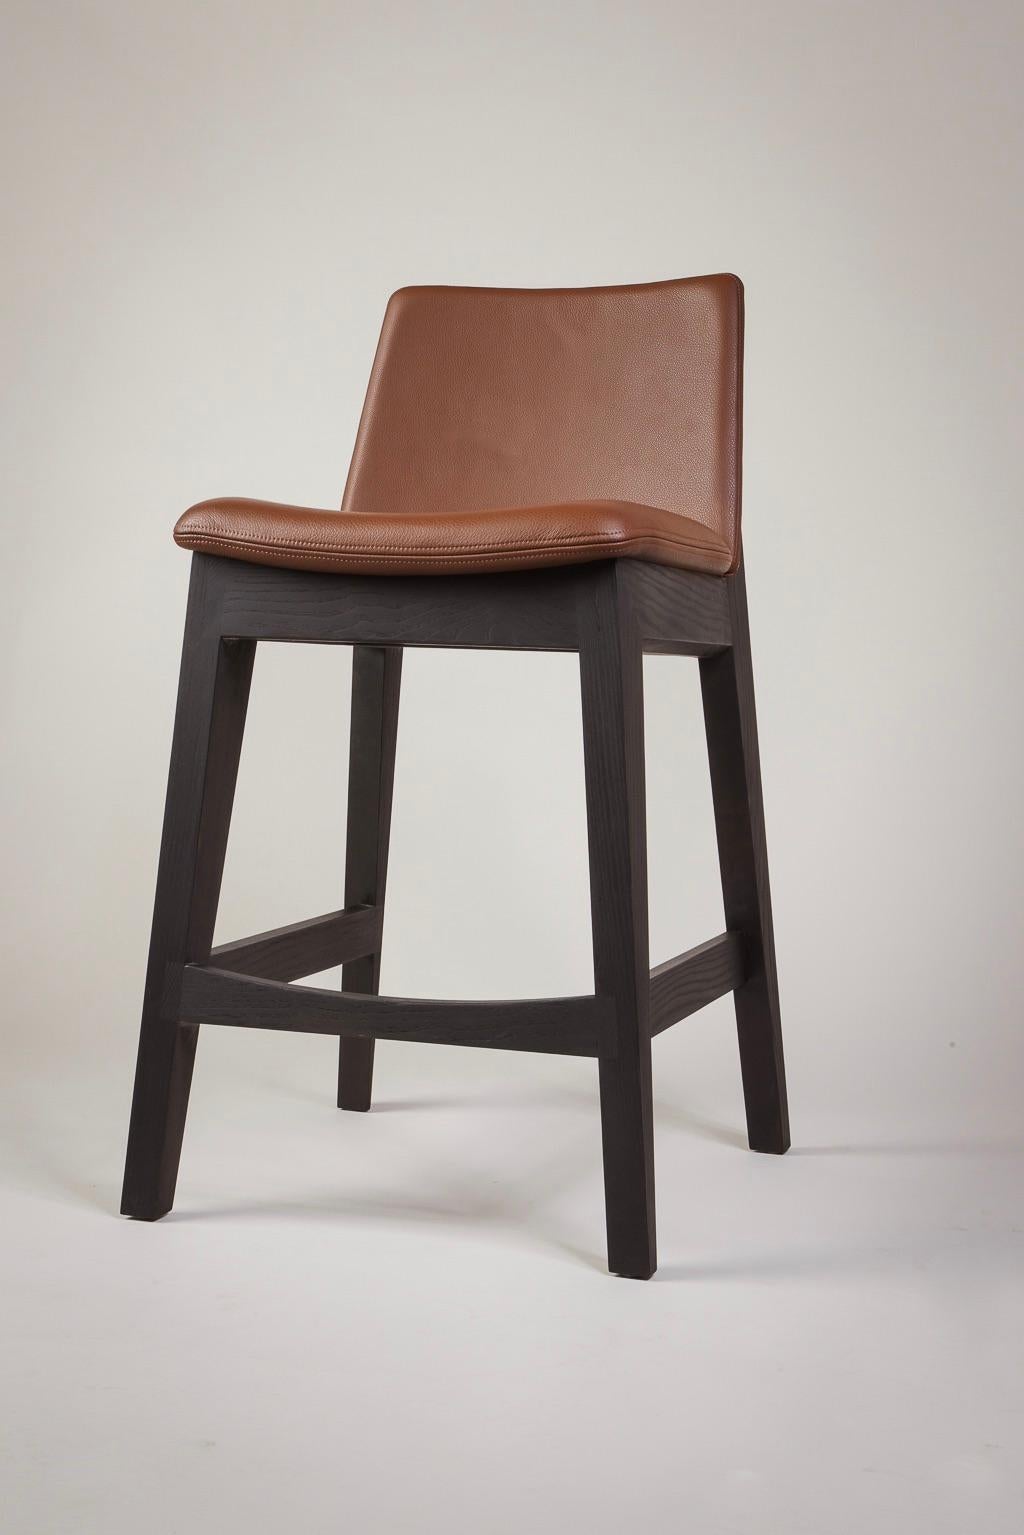 Contemporary Kroft Counter Stool, Bespoke Stool in Solid Ash & Leather